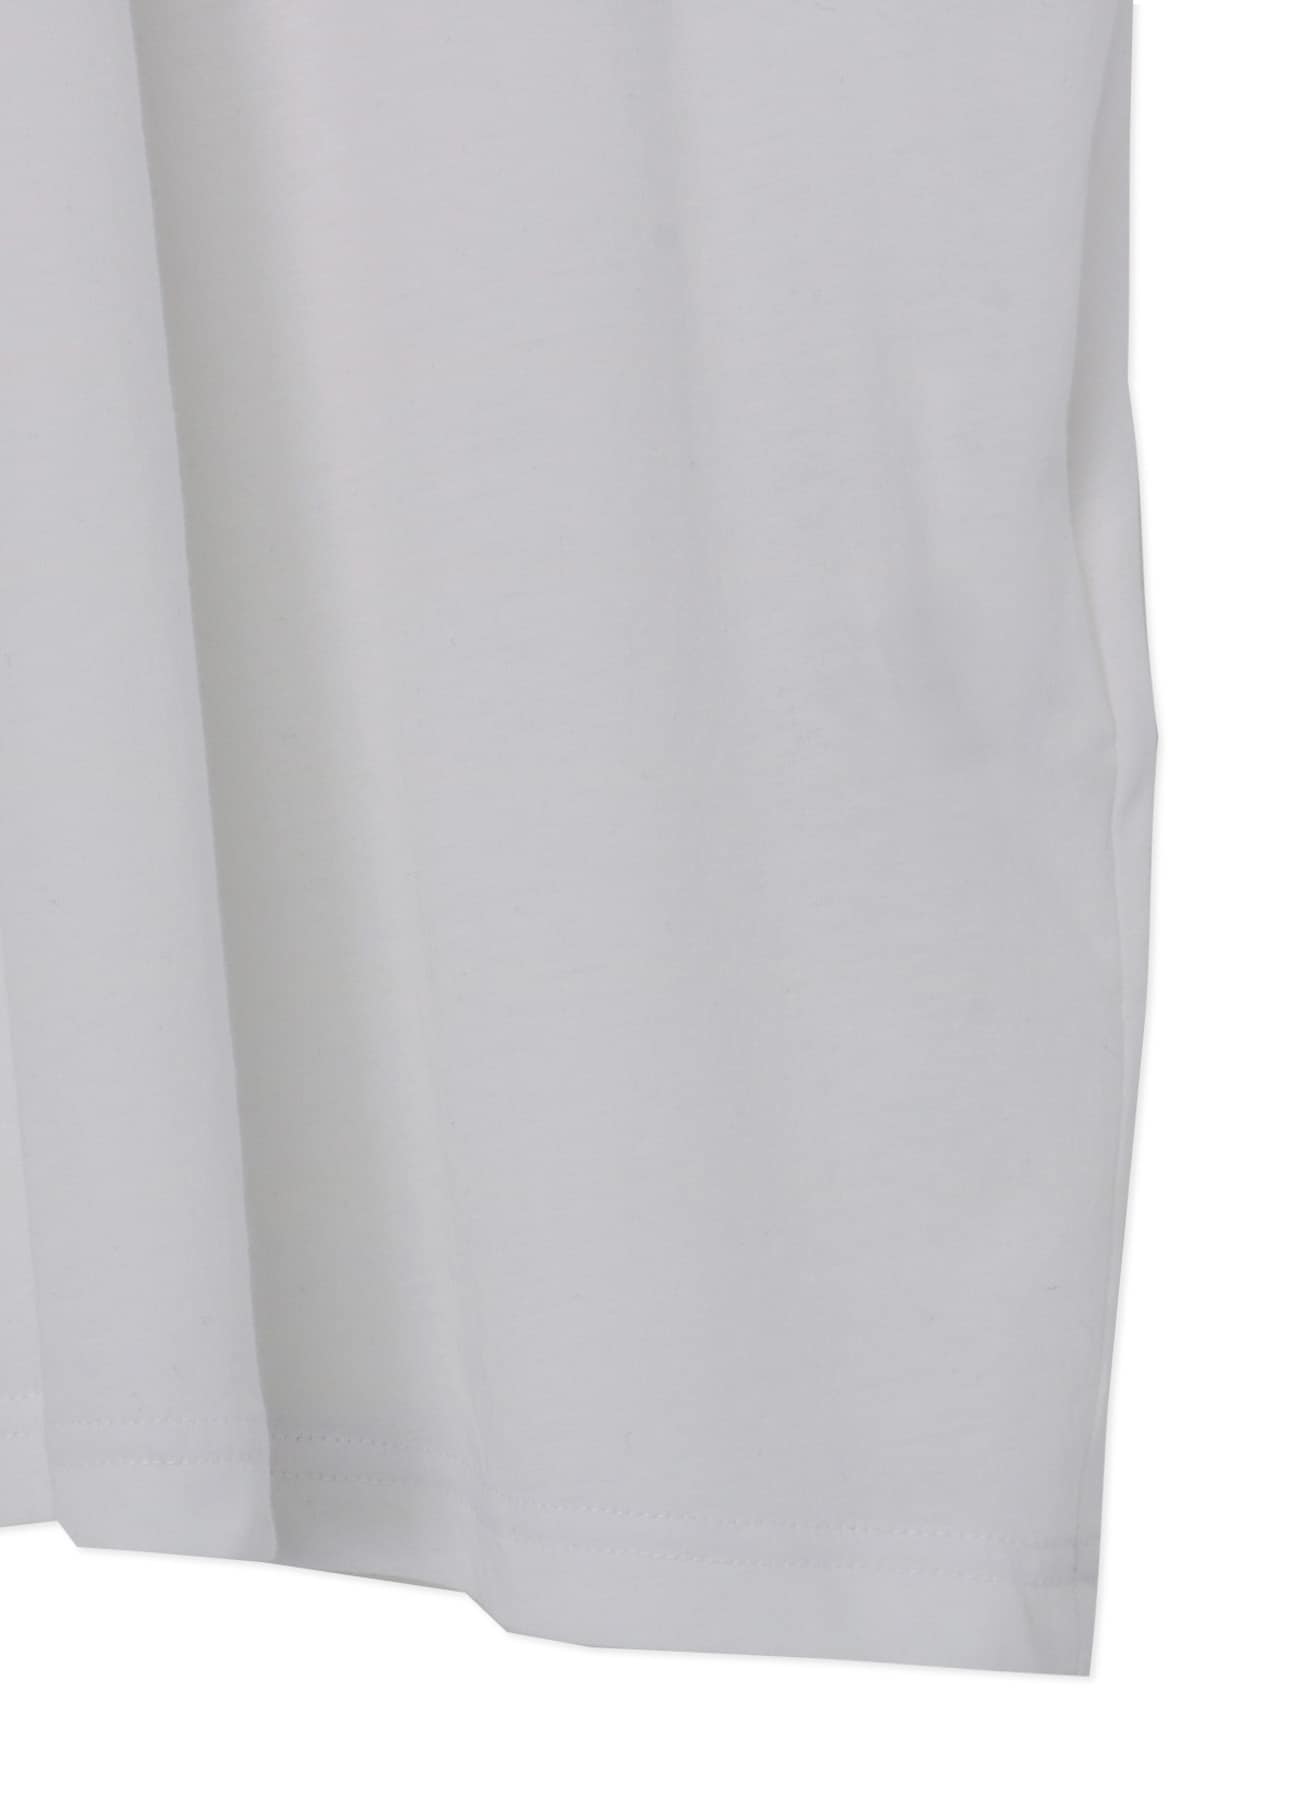 T-SHIRT DRESS WITH CHEST POCKET	